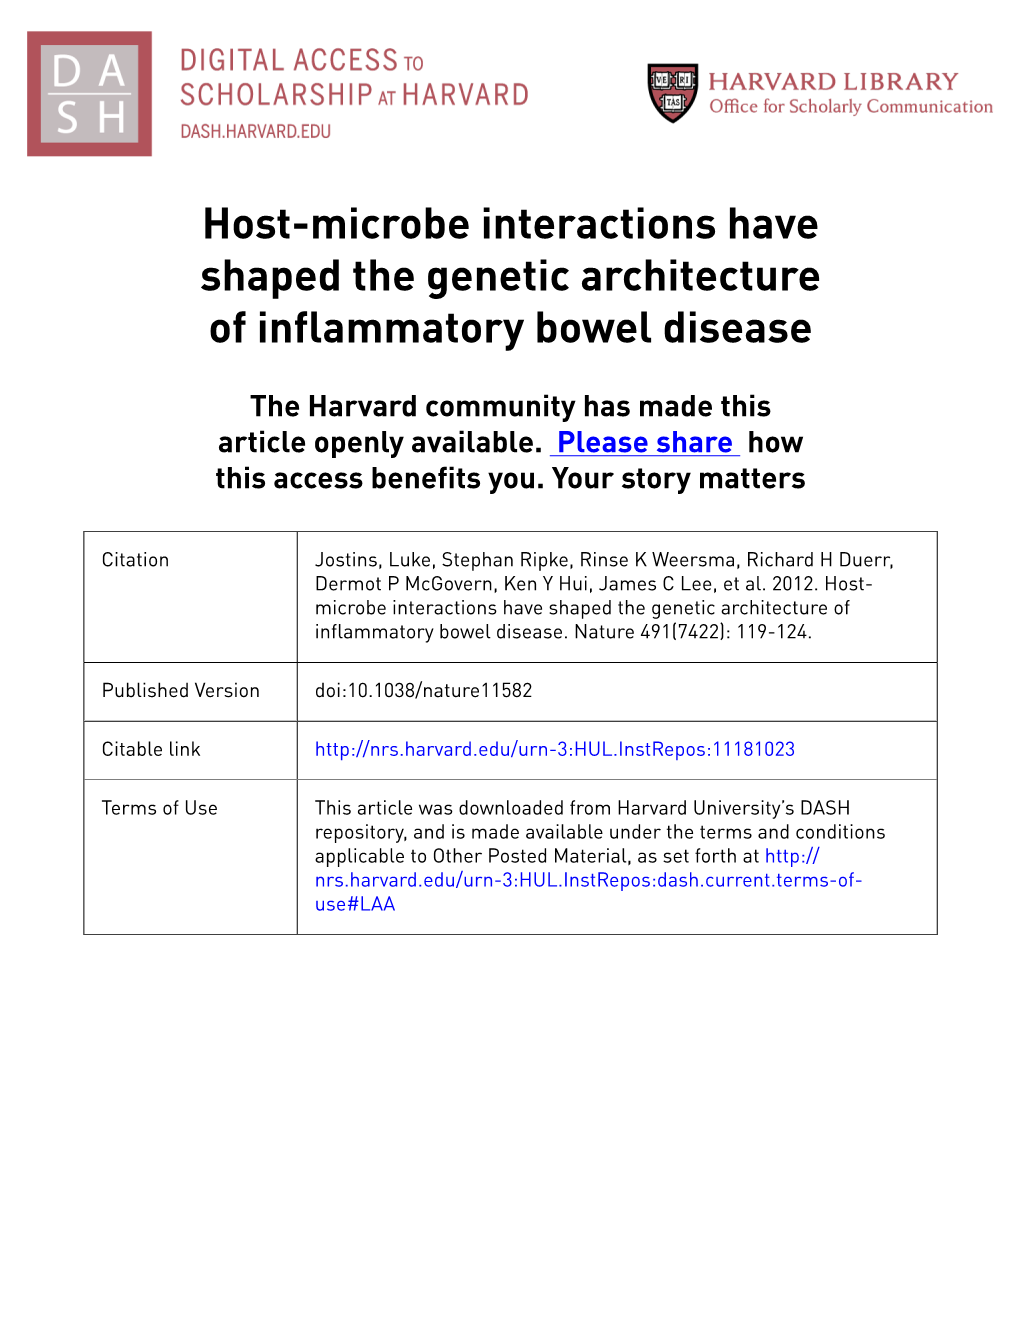 Host-Microbe Interactions Have Shaped the Genetic Architecture of Inflammatory Bowel Disease